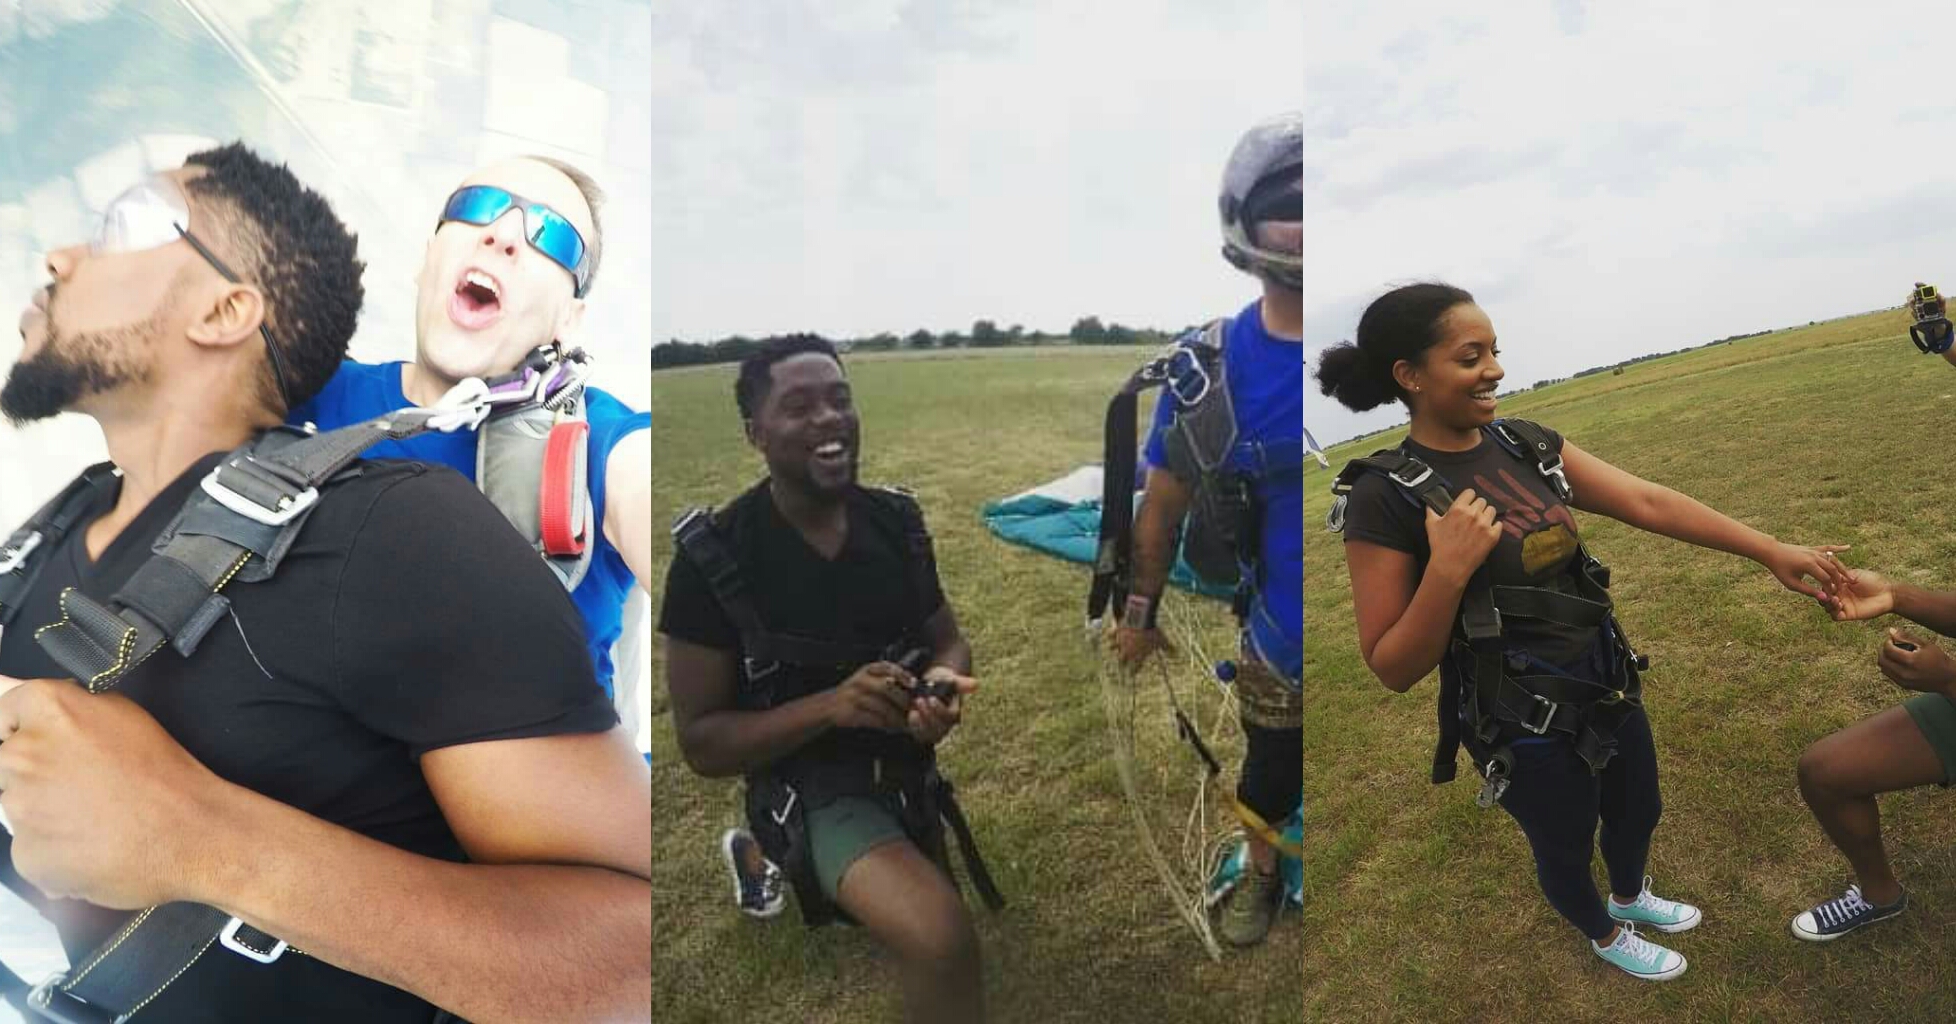 Man Jumps Out Of Aeroplane To Propose To His Girlfriend (Photos) 